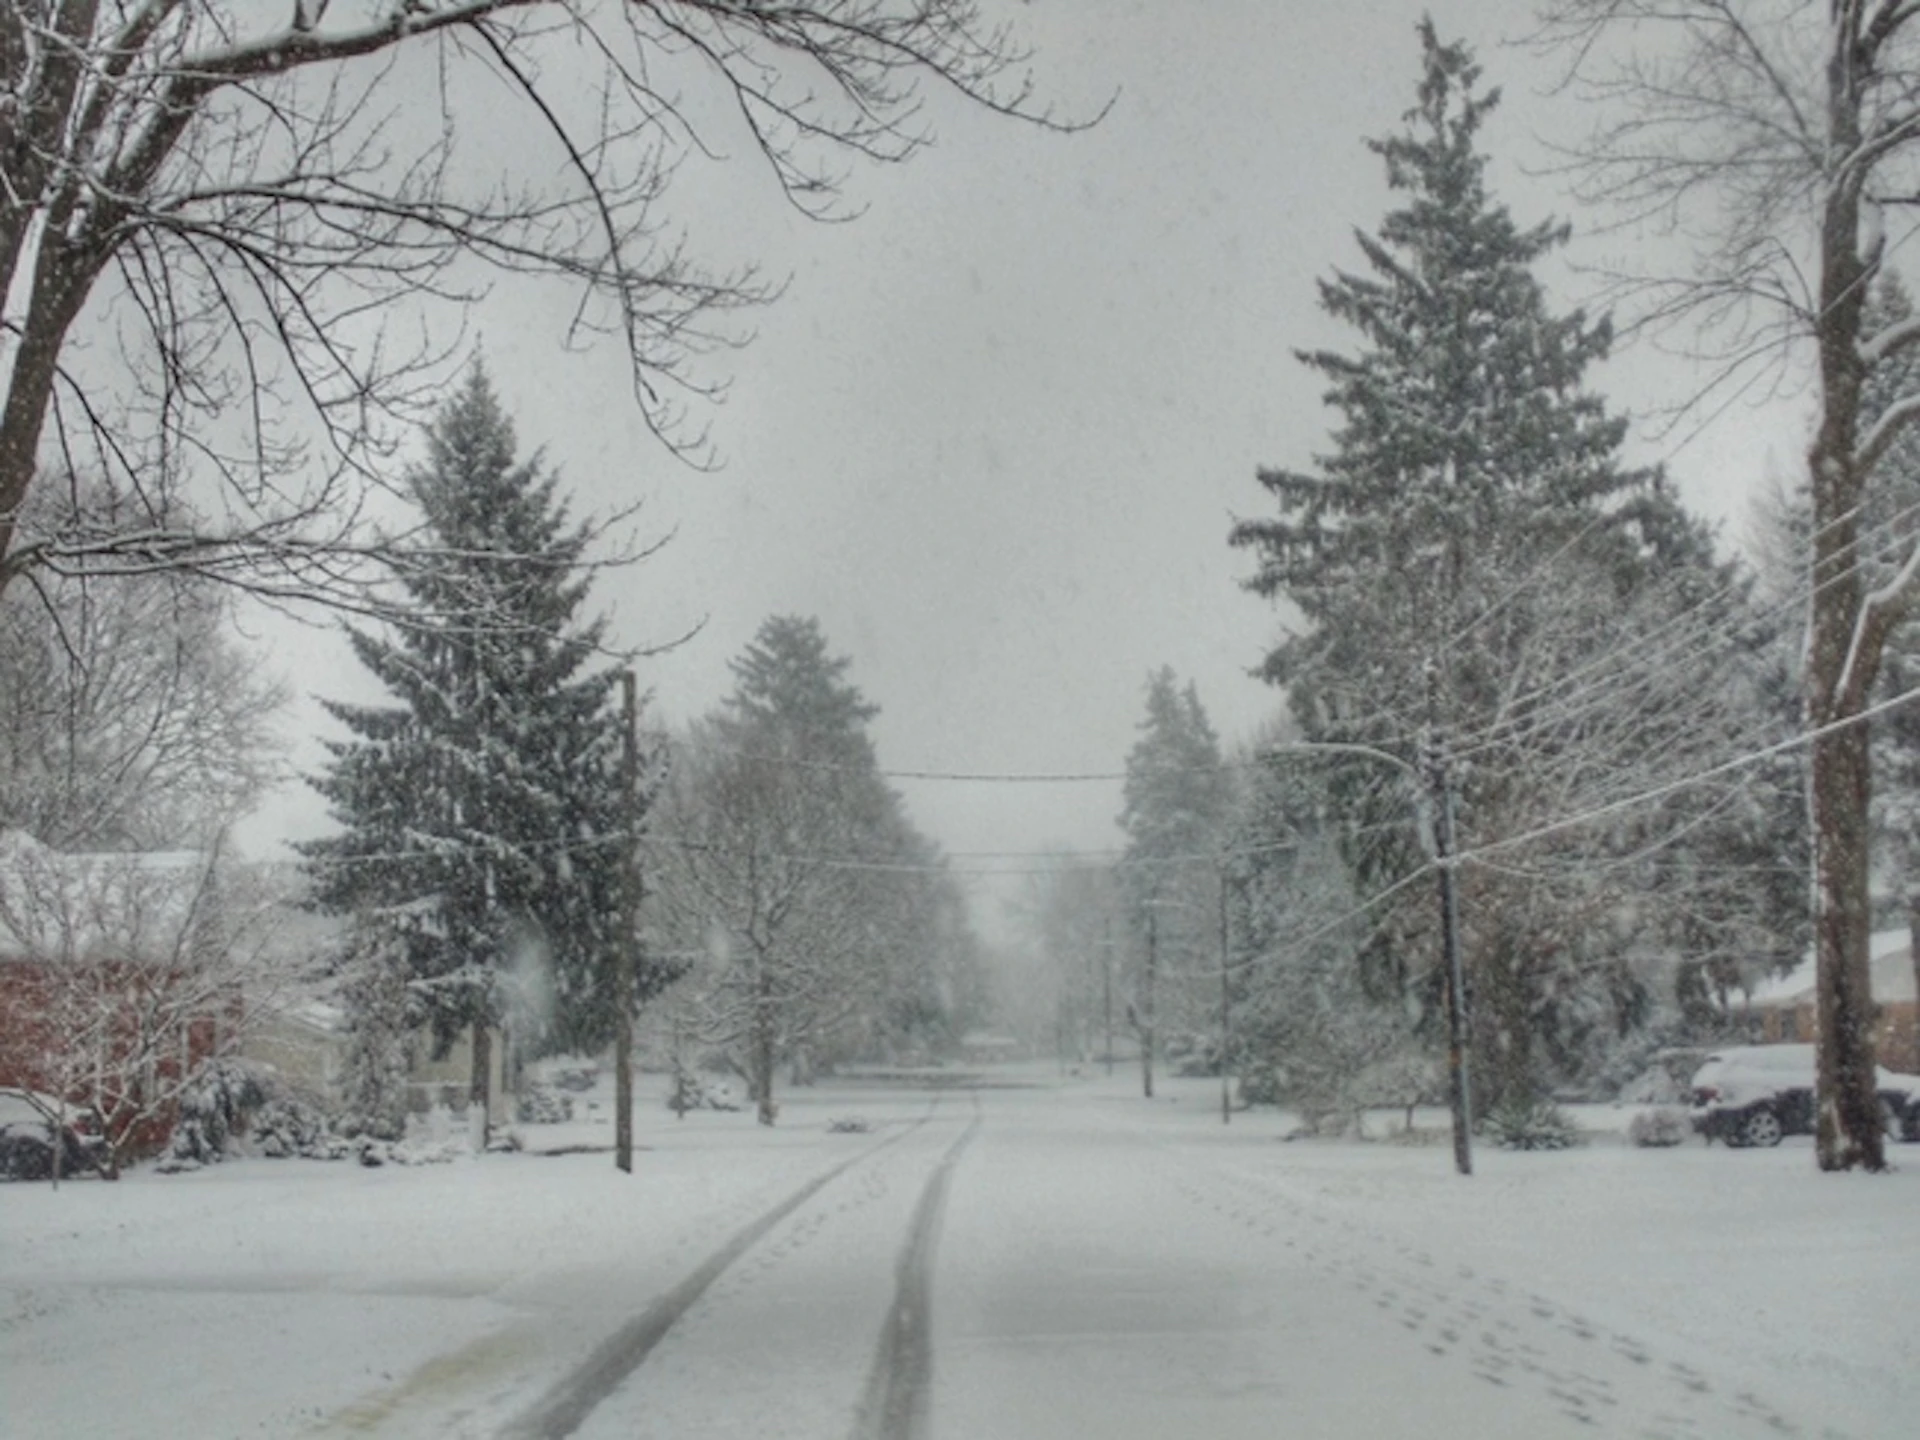 Snowvember? When Canada saw notable wintry weather ahead of schedule